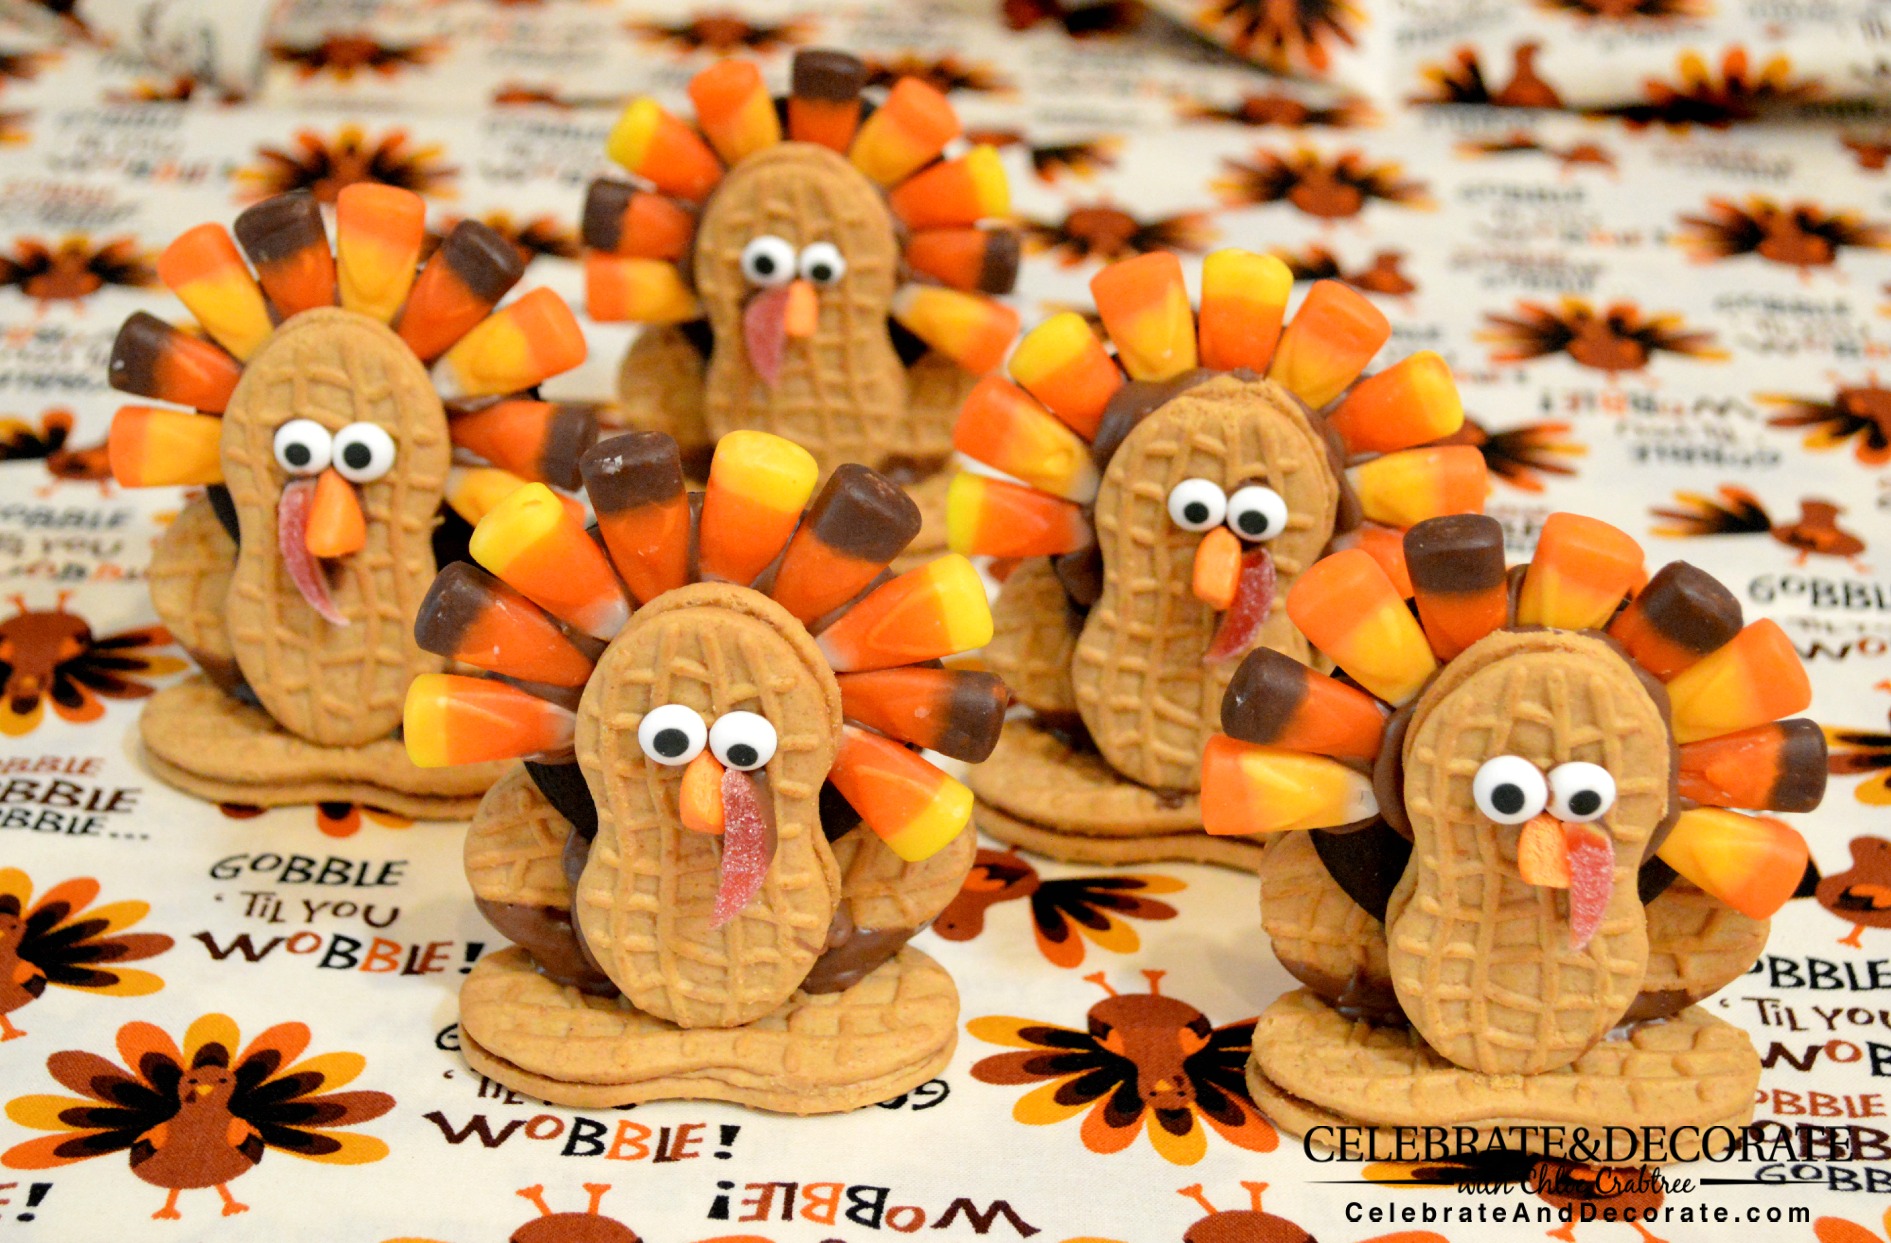 Turkey Treats for Thanksgiving - Celebrate & Decorate